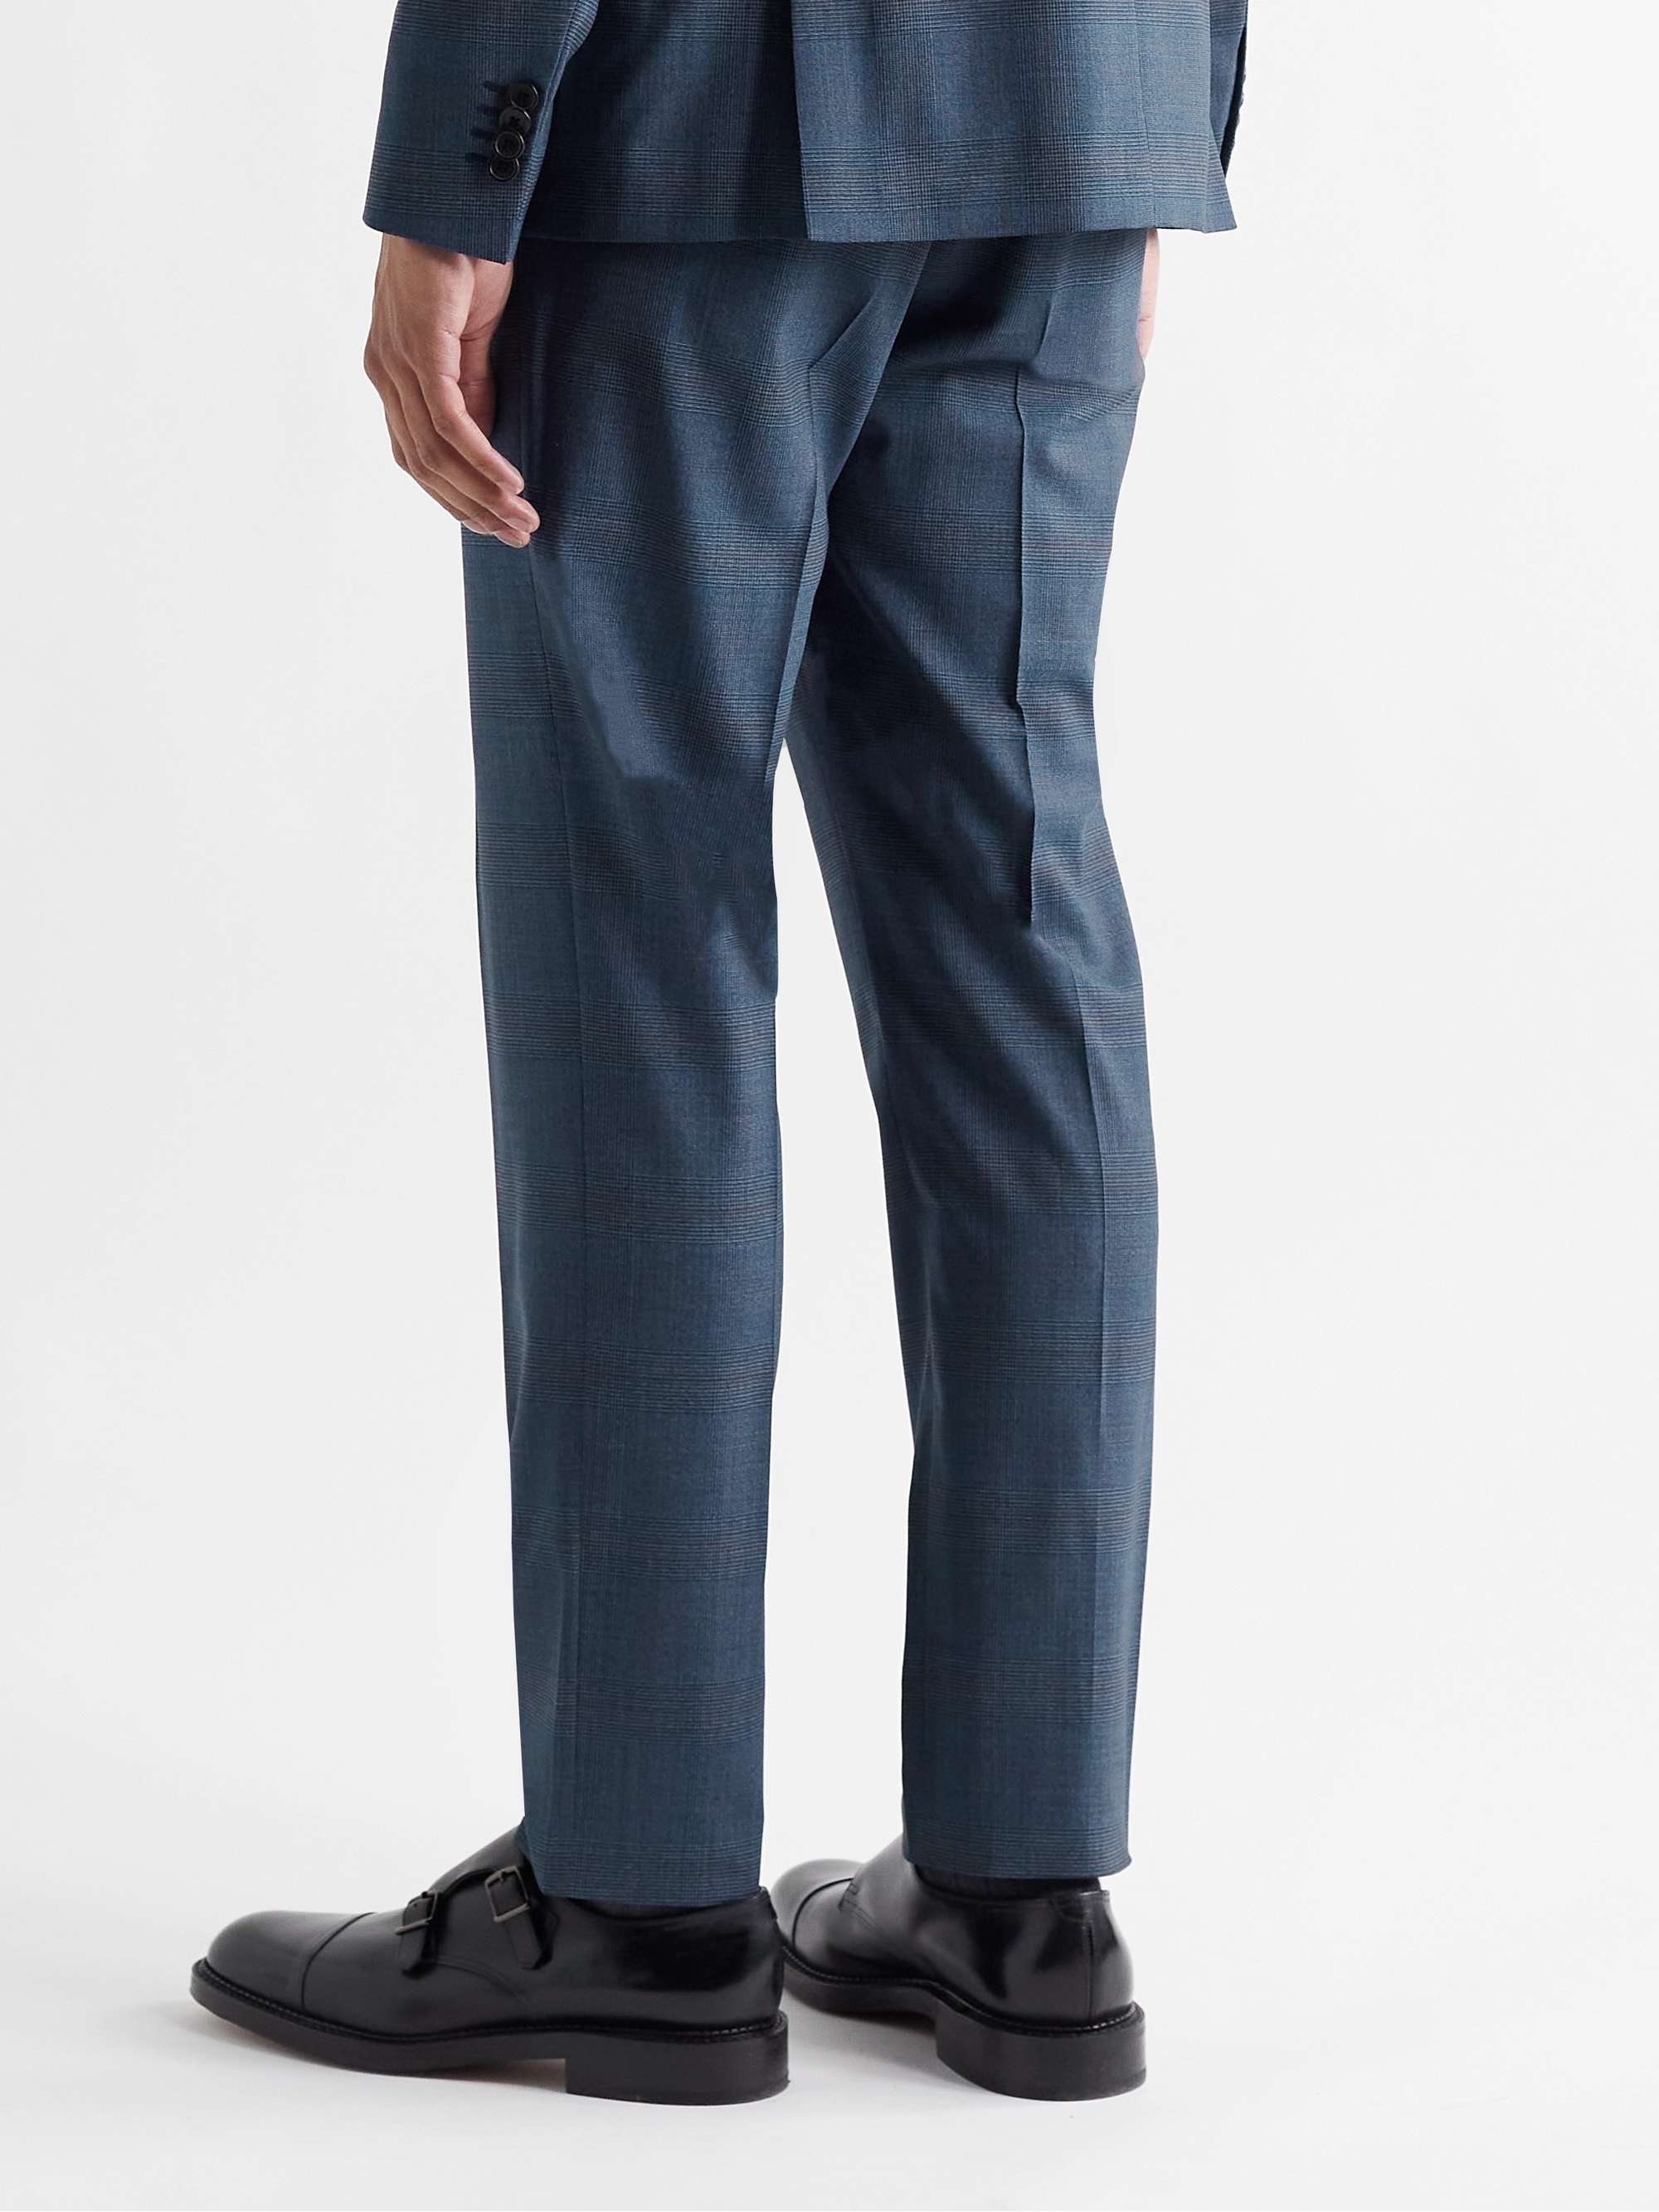 PAUL SMITH Slim-Fit Prince of Wales Checked Wool-Blend Suit Trousers